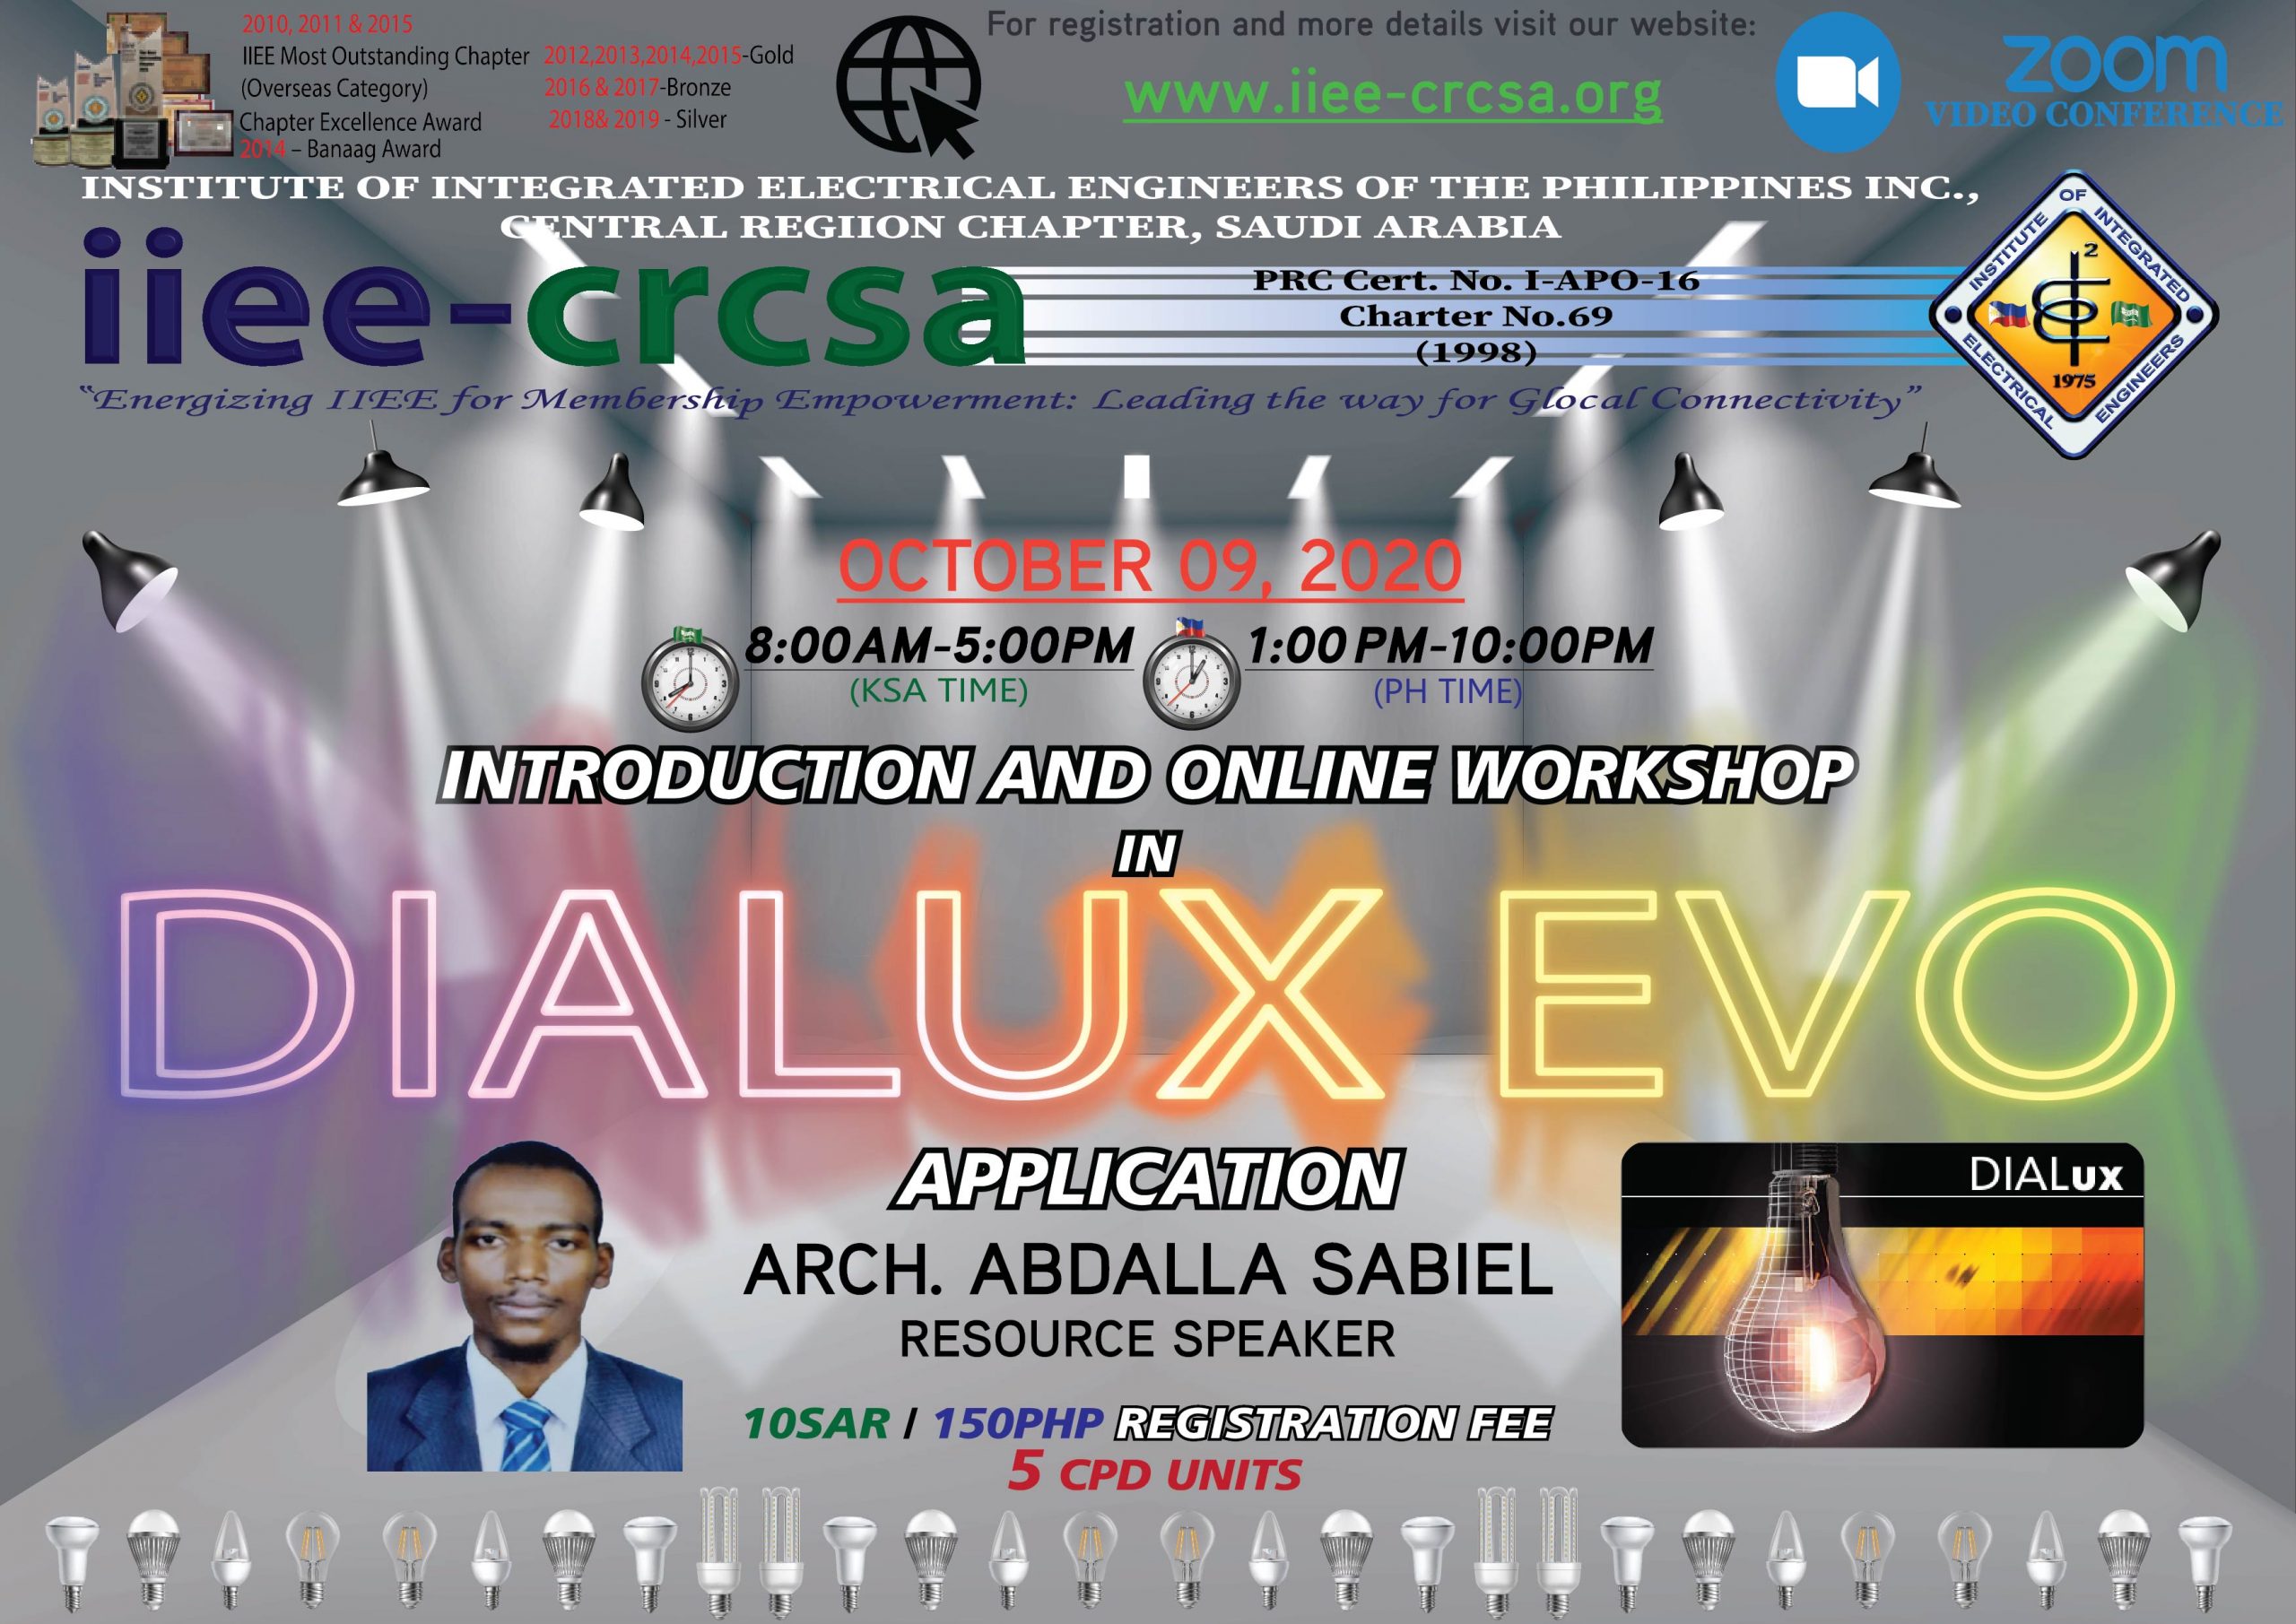 Introduction and Online Workshop in Dialux Evo Application